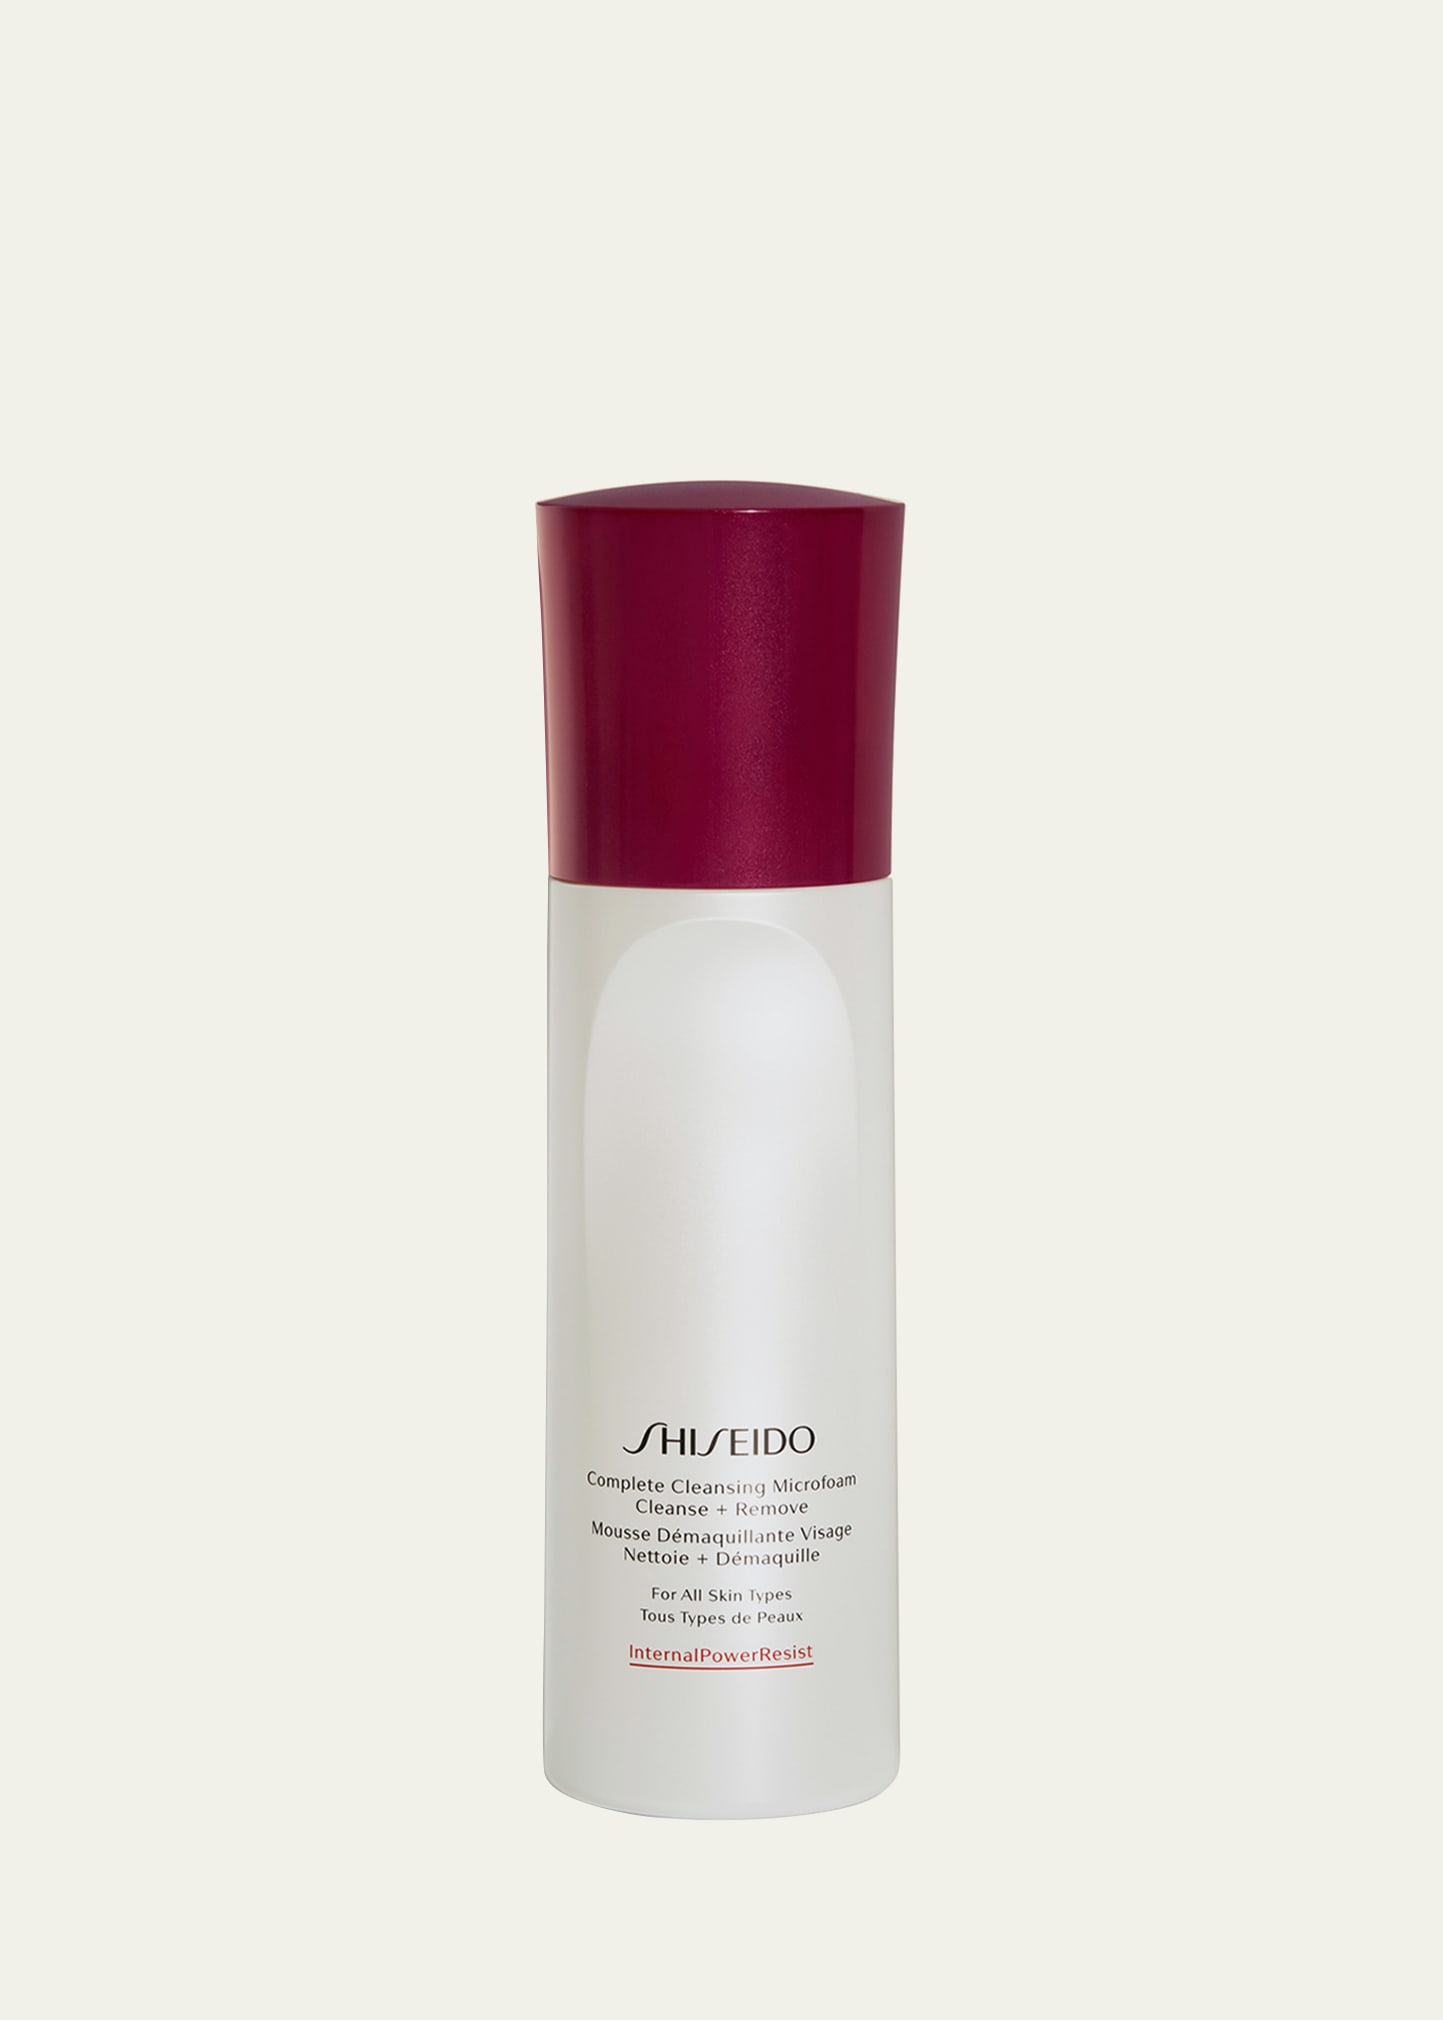 Complete Cleansing Microfoam, 6 oz.